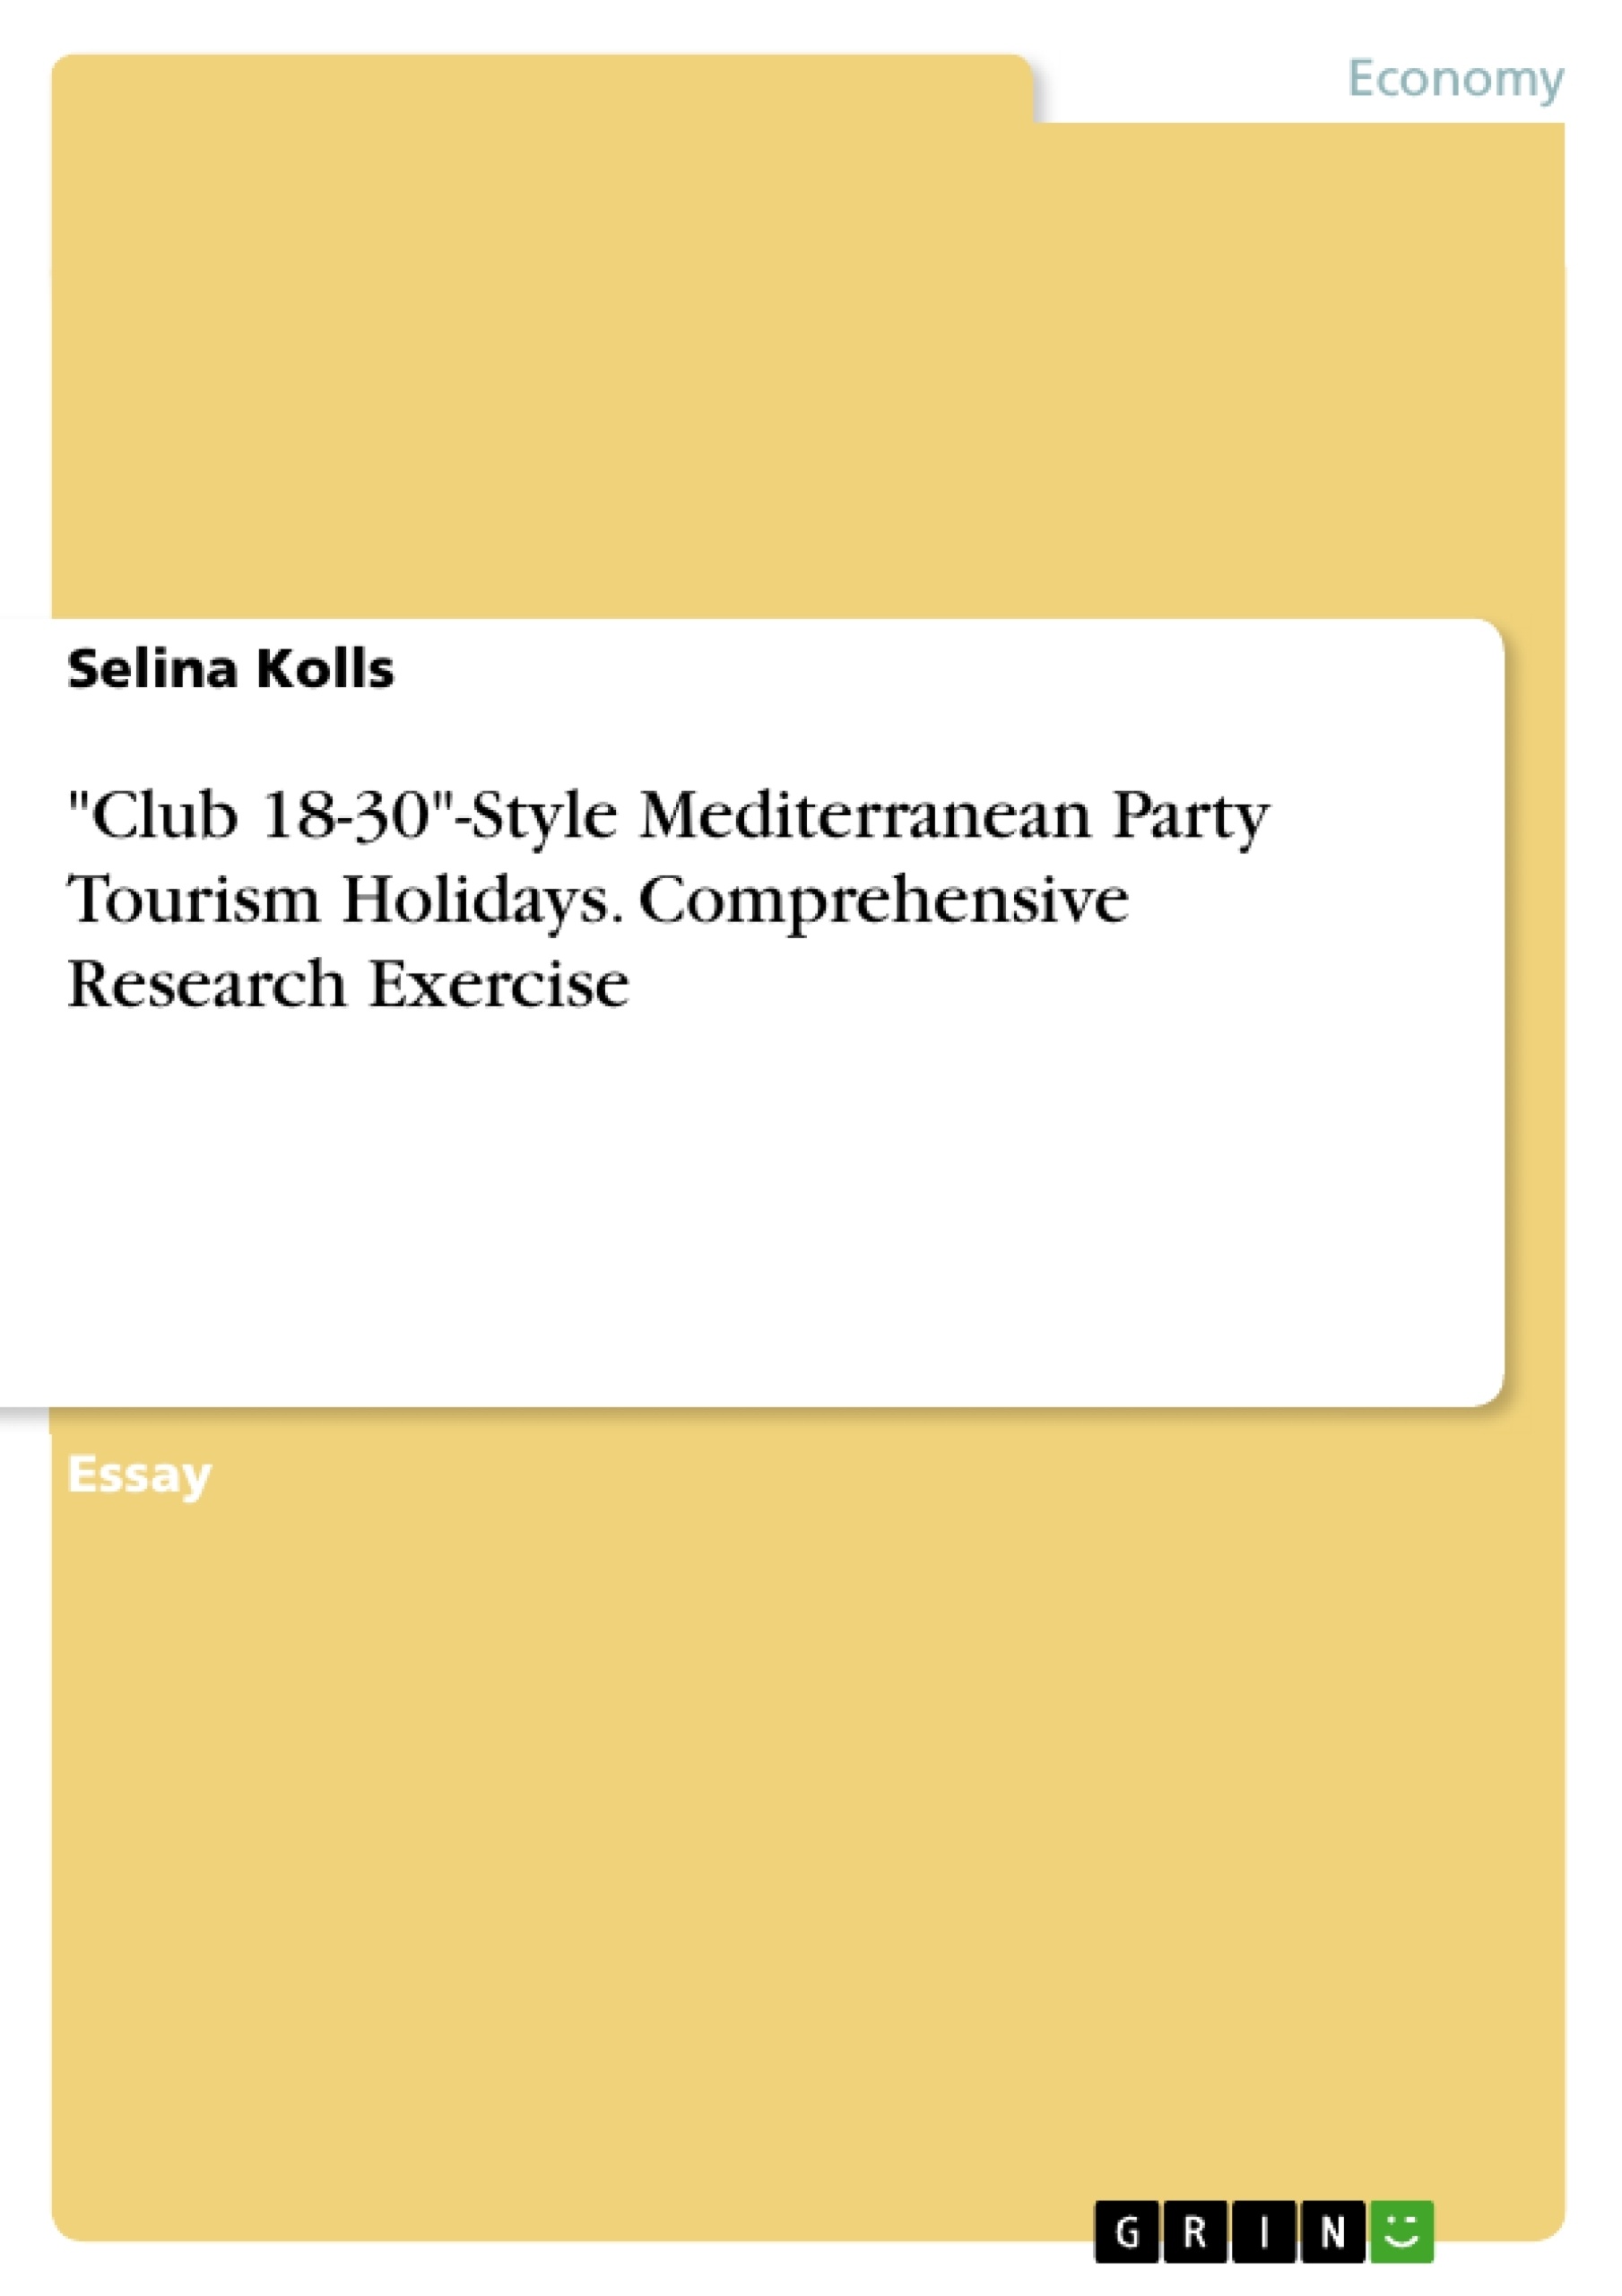 Título: "Club 18-30"-Style Mediterranean Party Tourism Holidays. Comprehensive Research Exercise